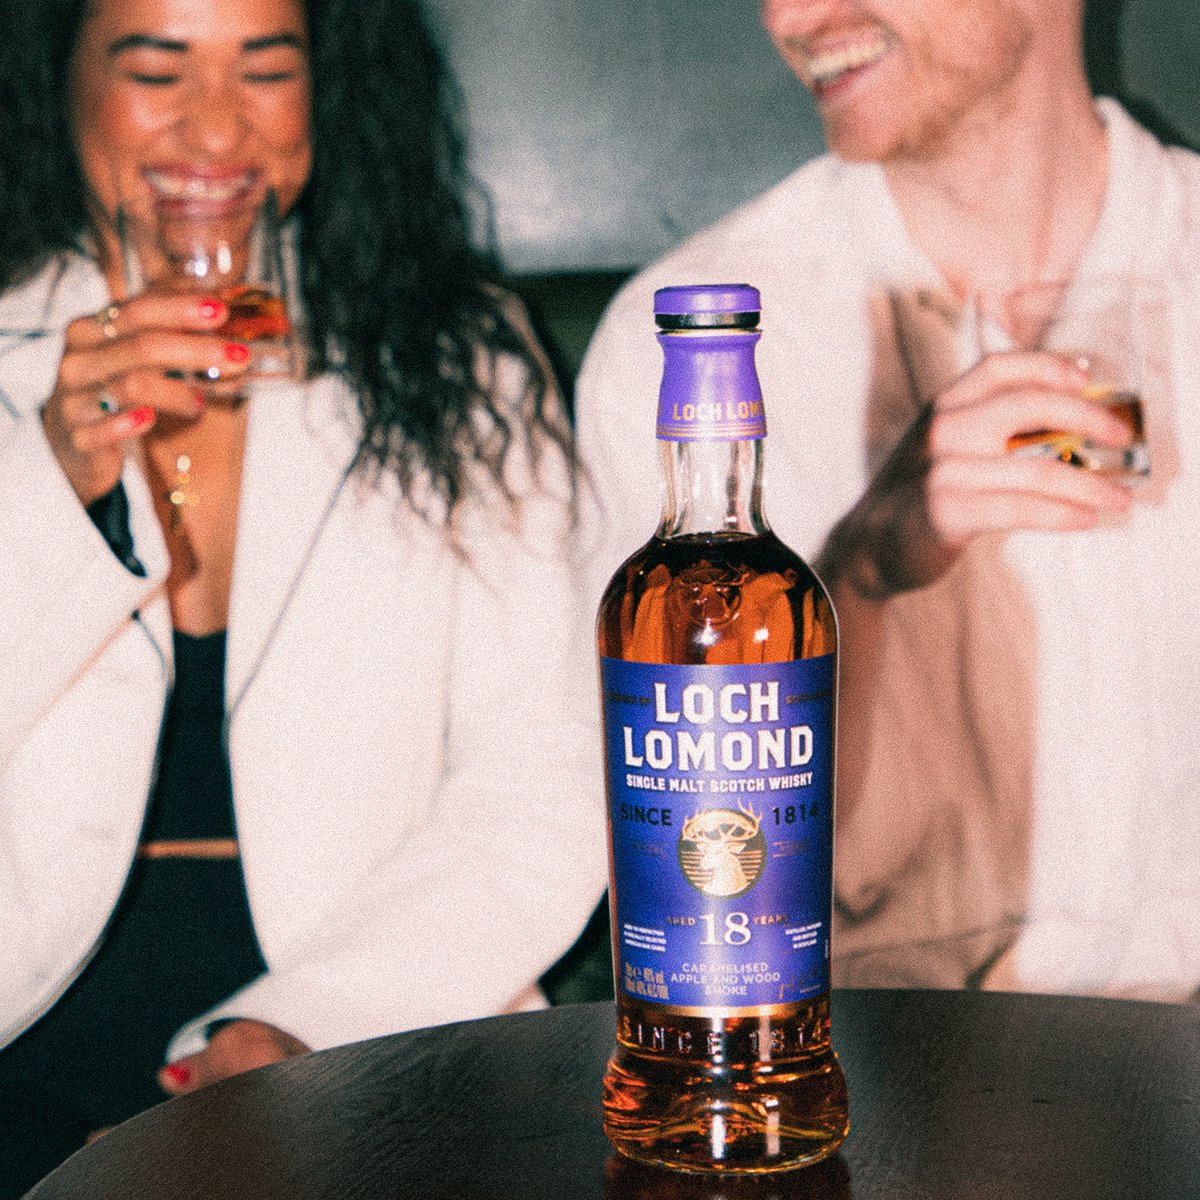 Sweetness and warmth intertwined with a hint of smoke. Loch Lomond 18 Year Old is the perfect accompaniment to moments worth capturing.